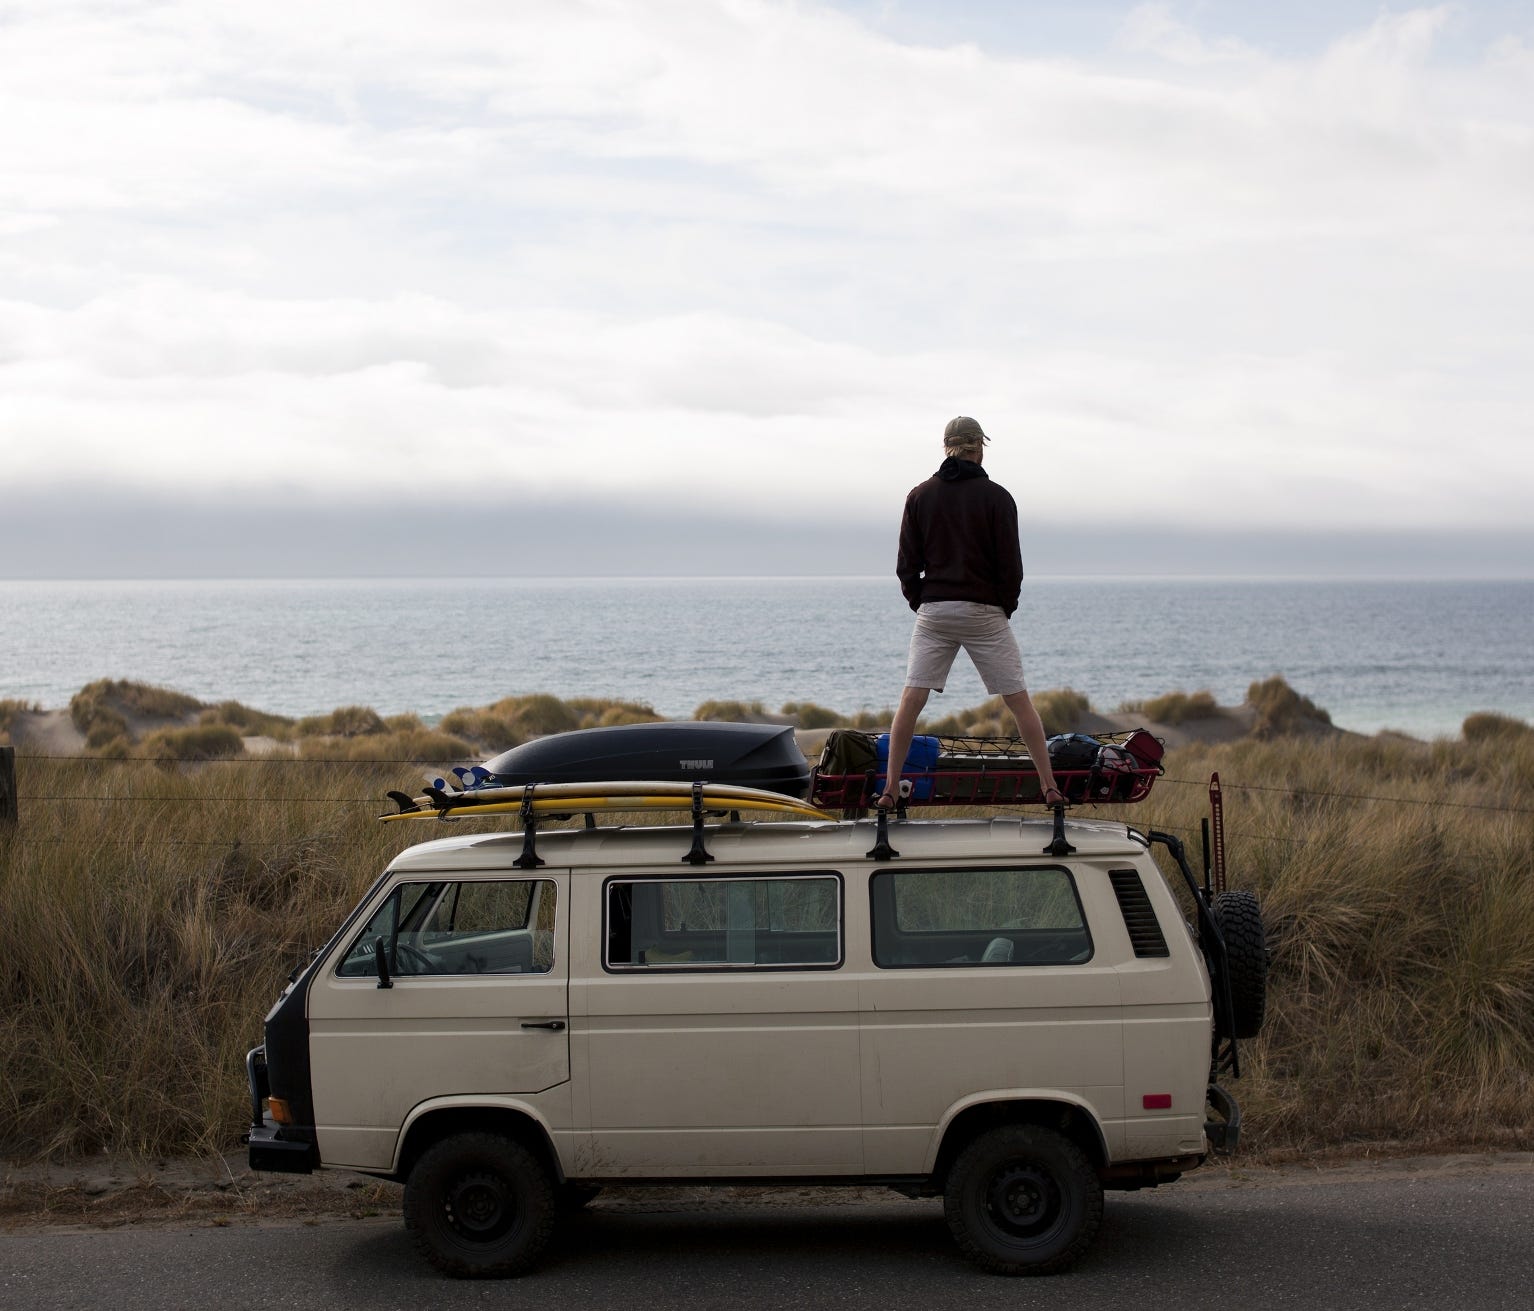 Six years ago, Foster Huntington gave up his corporate job in New York to live in a van. His Instagram posts tagged #vanlife picked up more than 1 million followers and helped start a movement of like-minded wanderers. He offers tips for joining the 